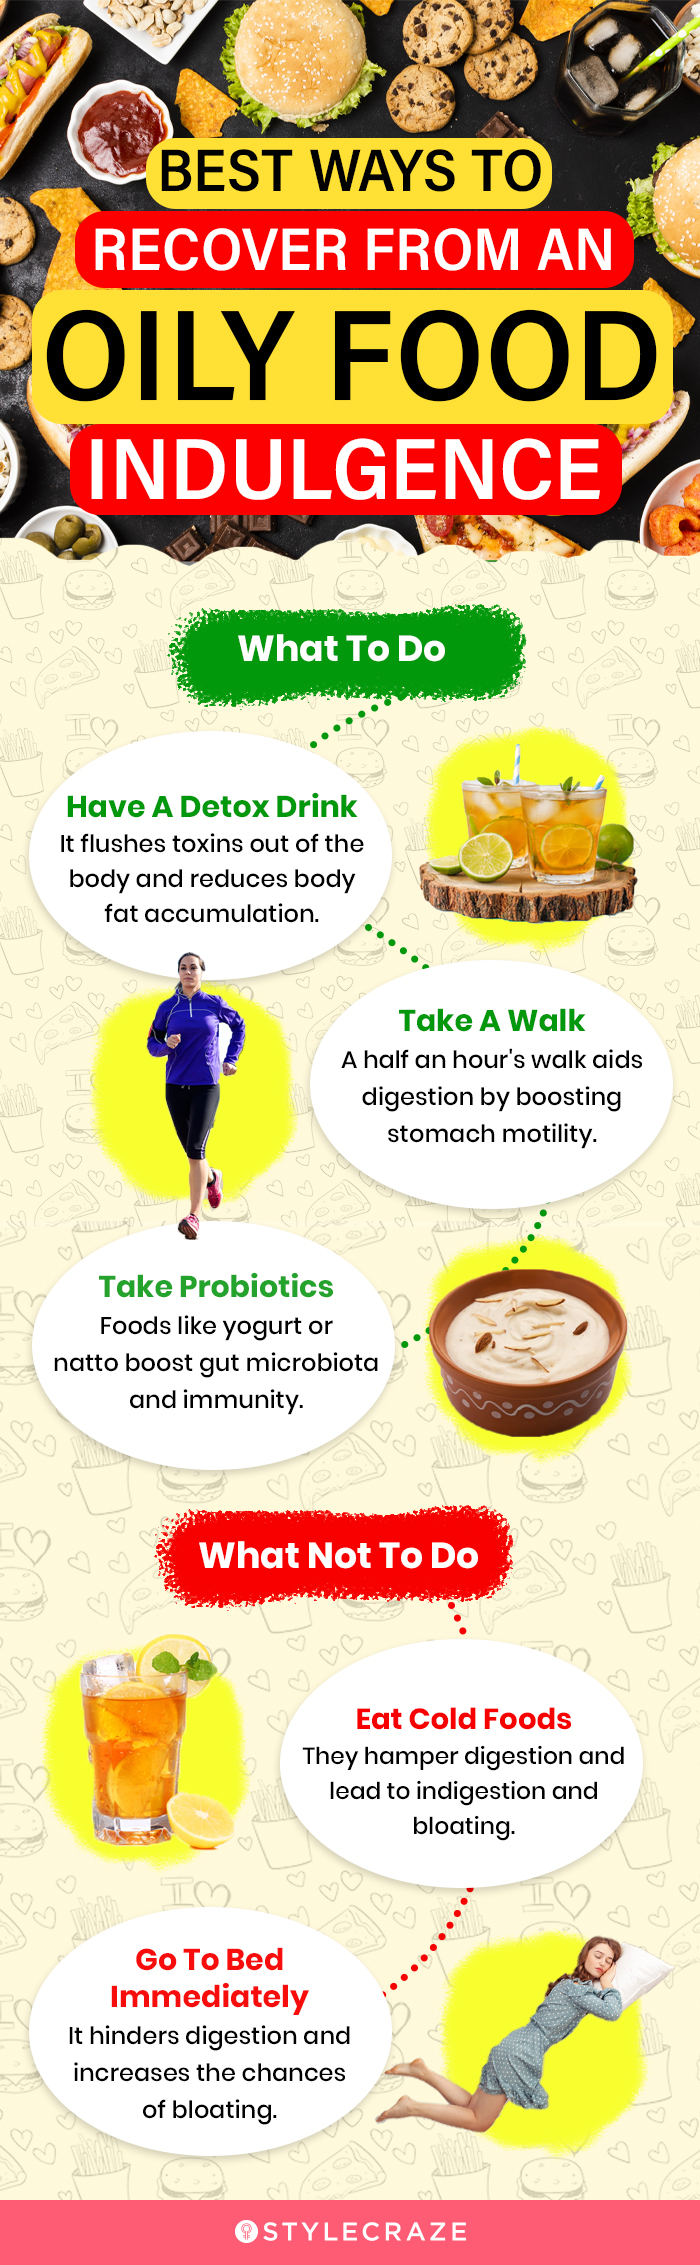 best ways to recover from an oily food indulgence [infographic]